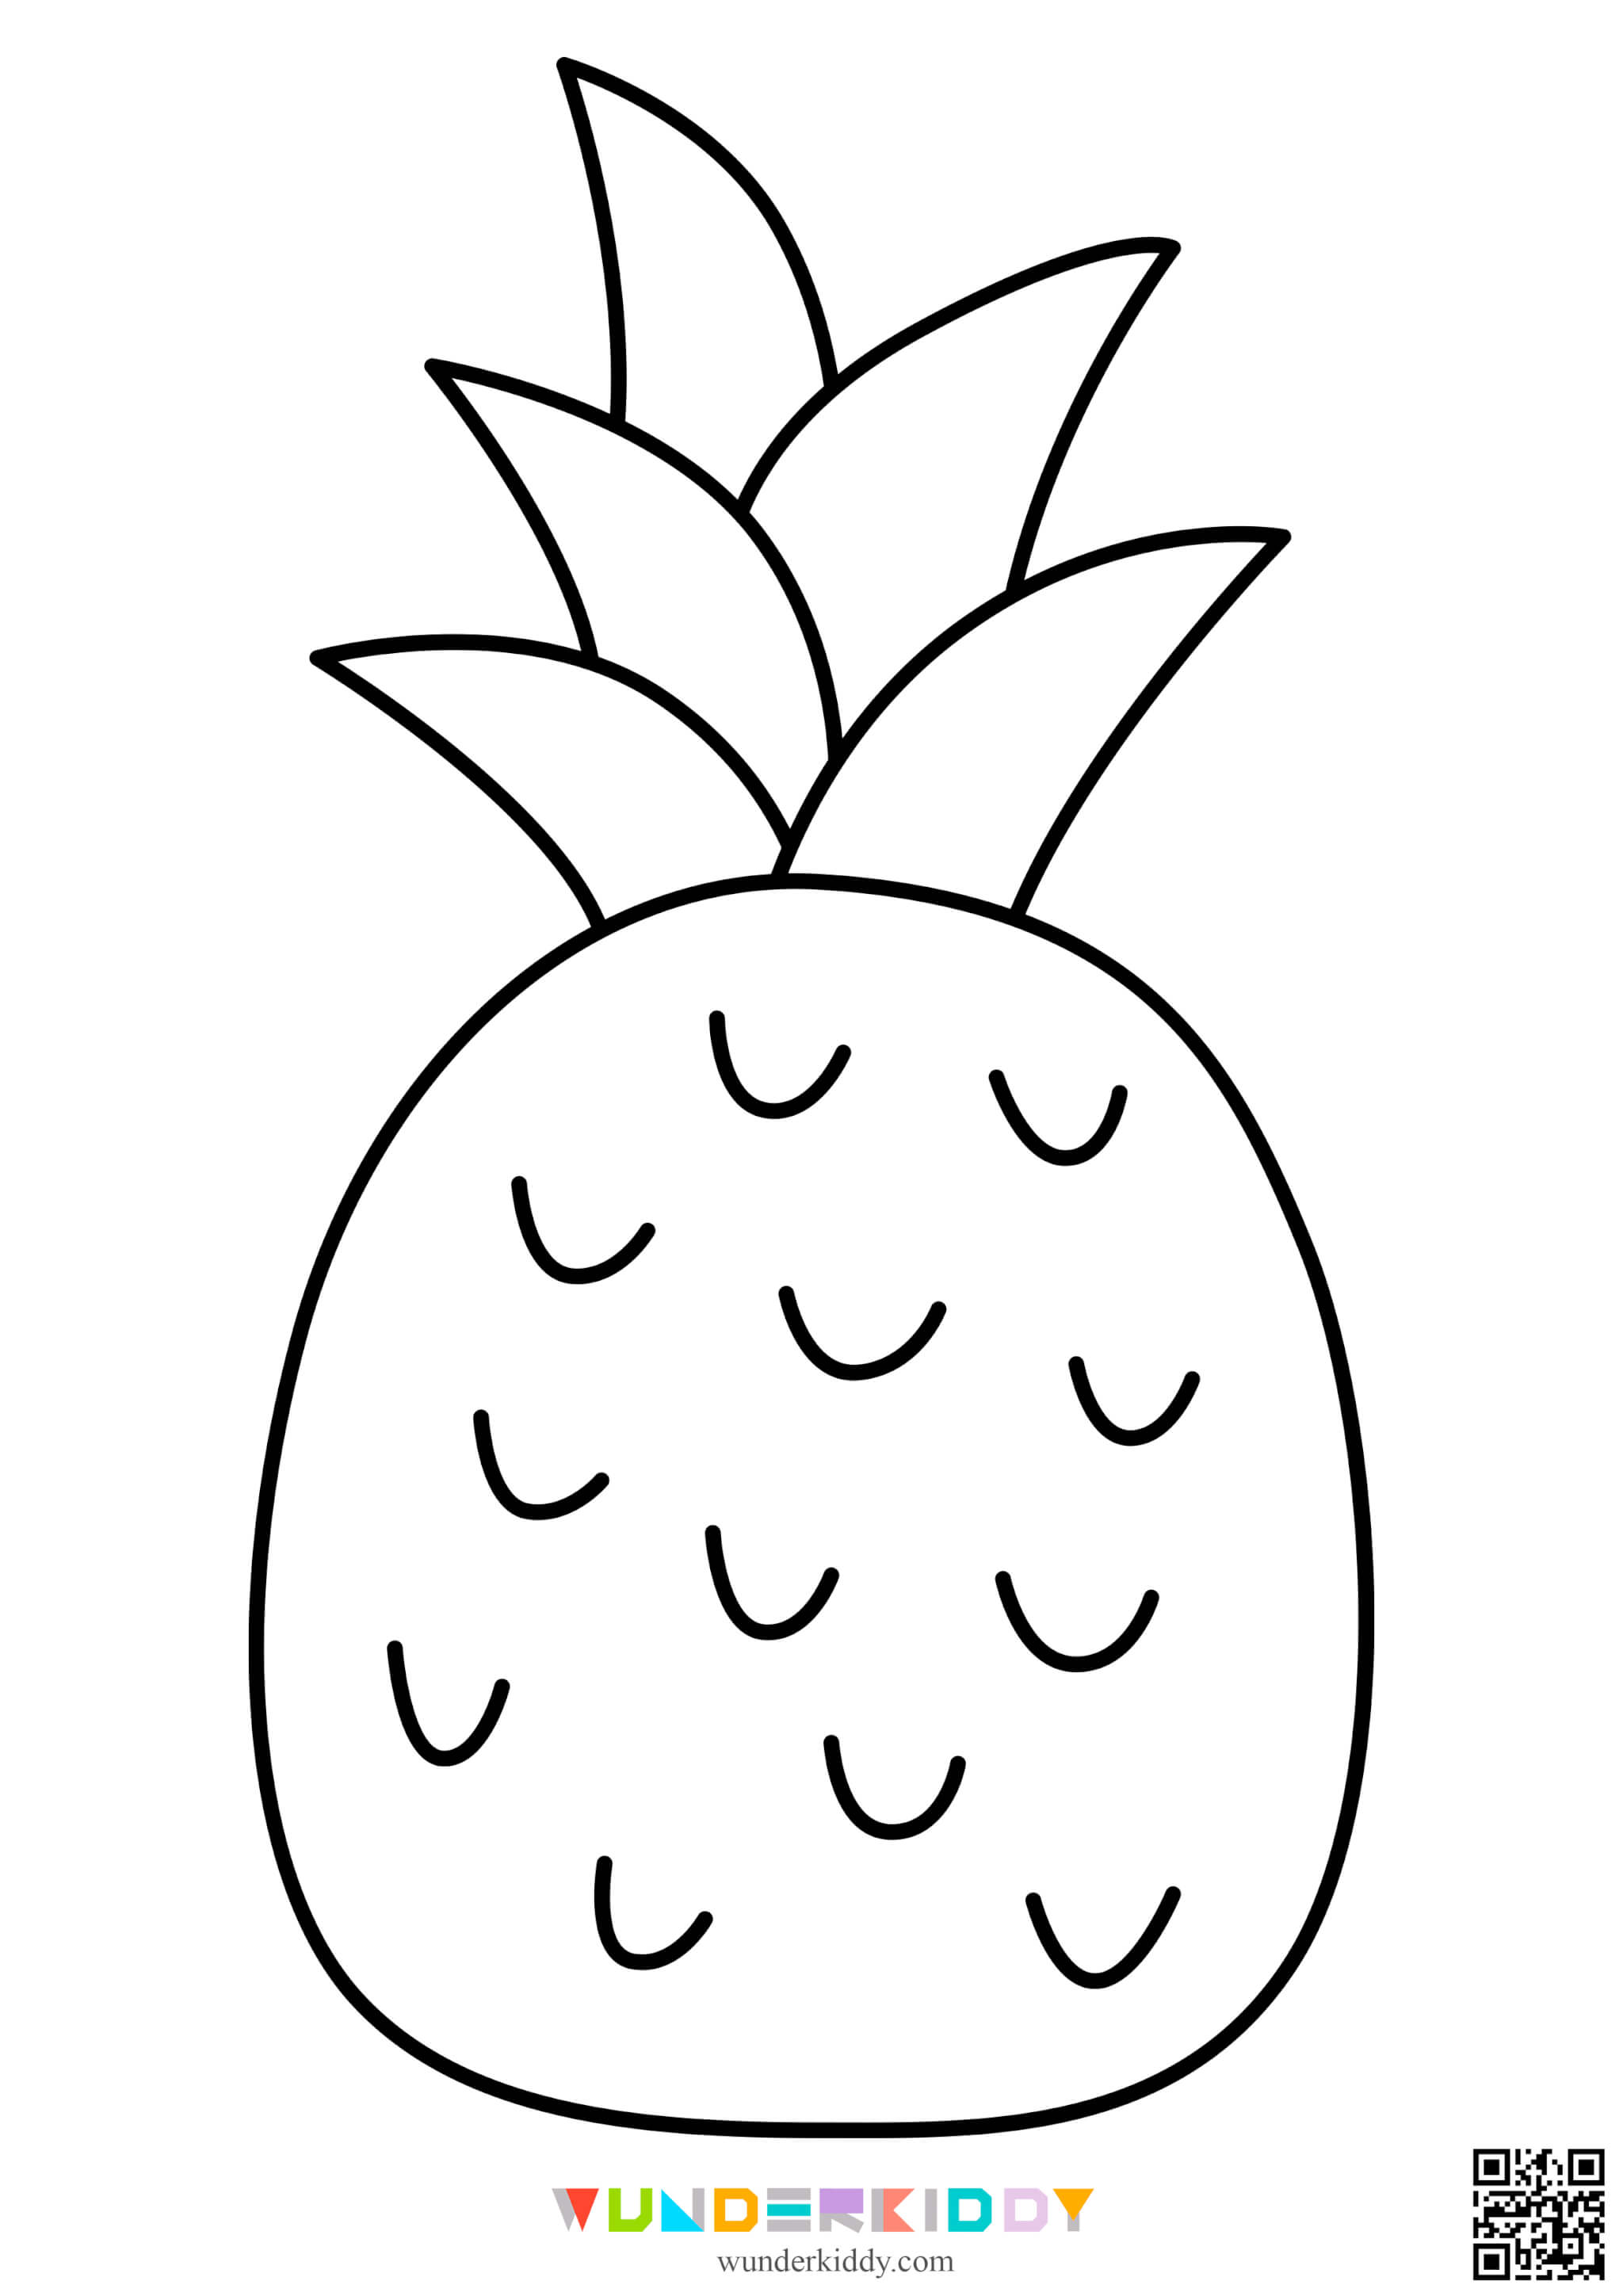 Summer Coloring Pages for Kids - Image 7